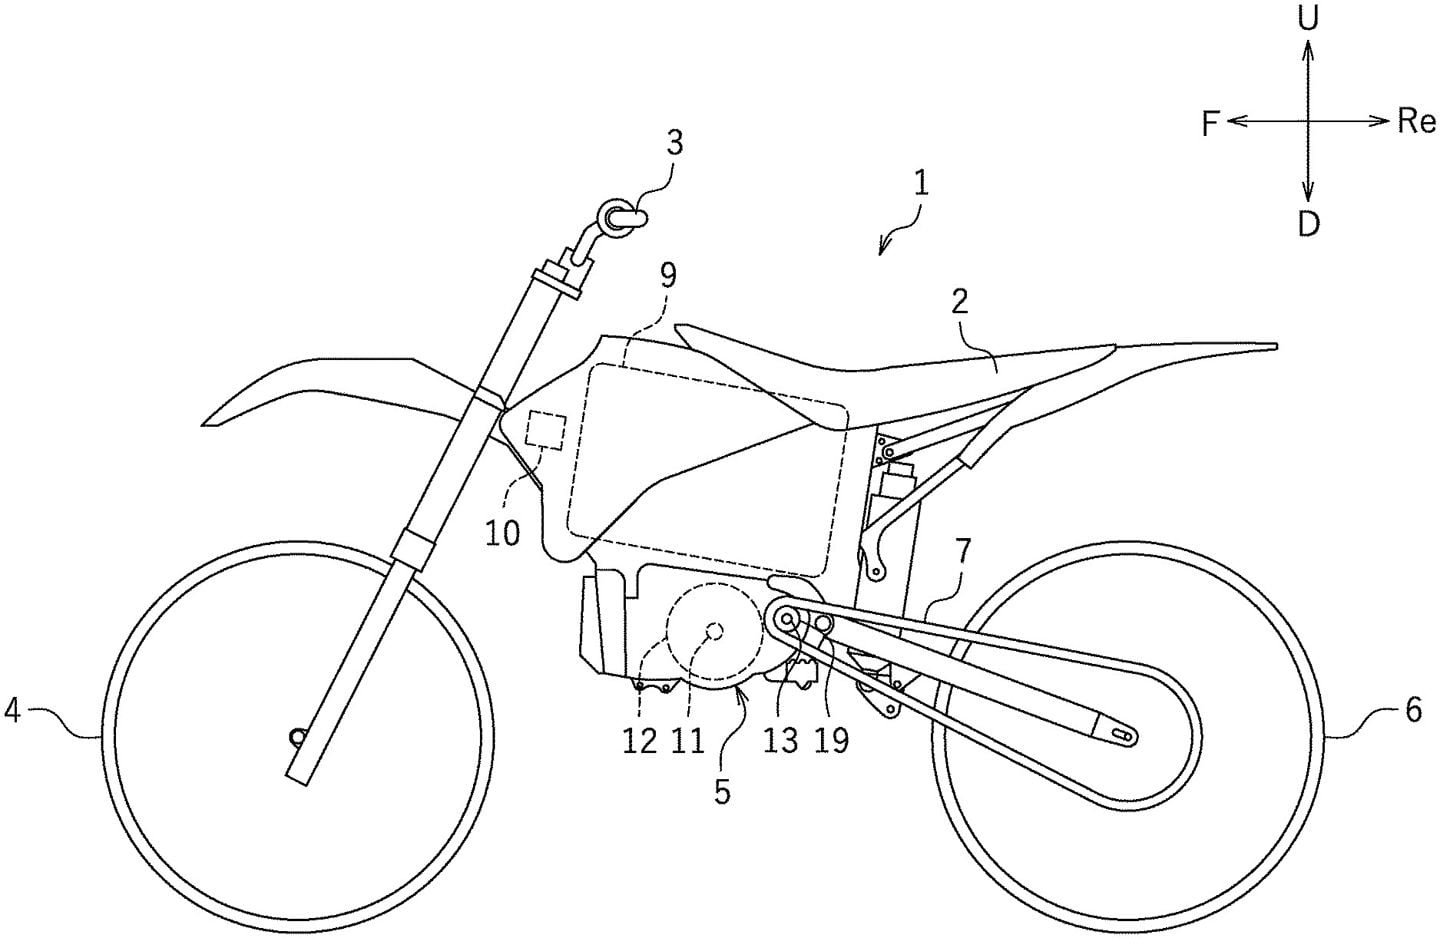 Although visually simple, Yamaha has filed patents that detail work it is doing on an electric motocross bike, which has some unique features.